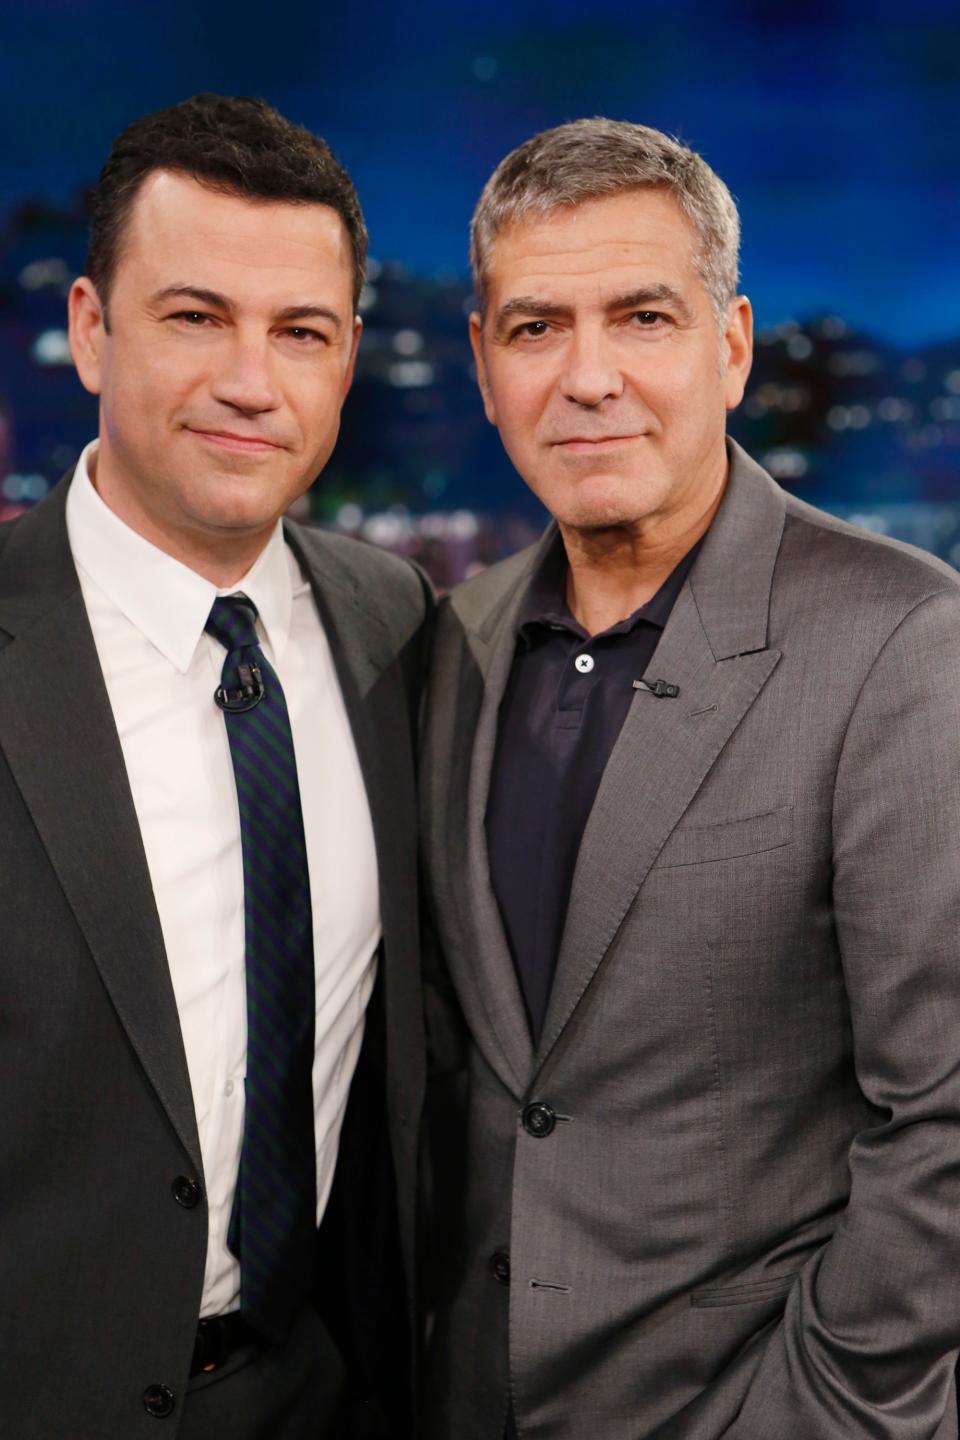 Clooney also visited Kimmel's show in season 13.